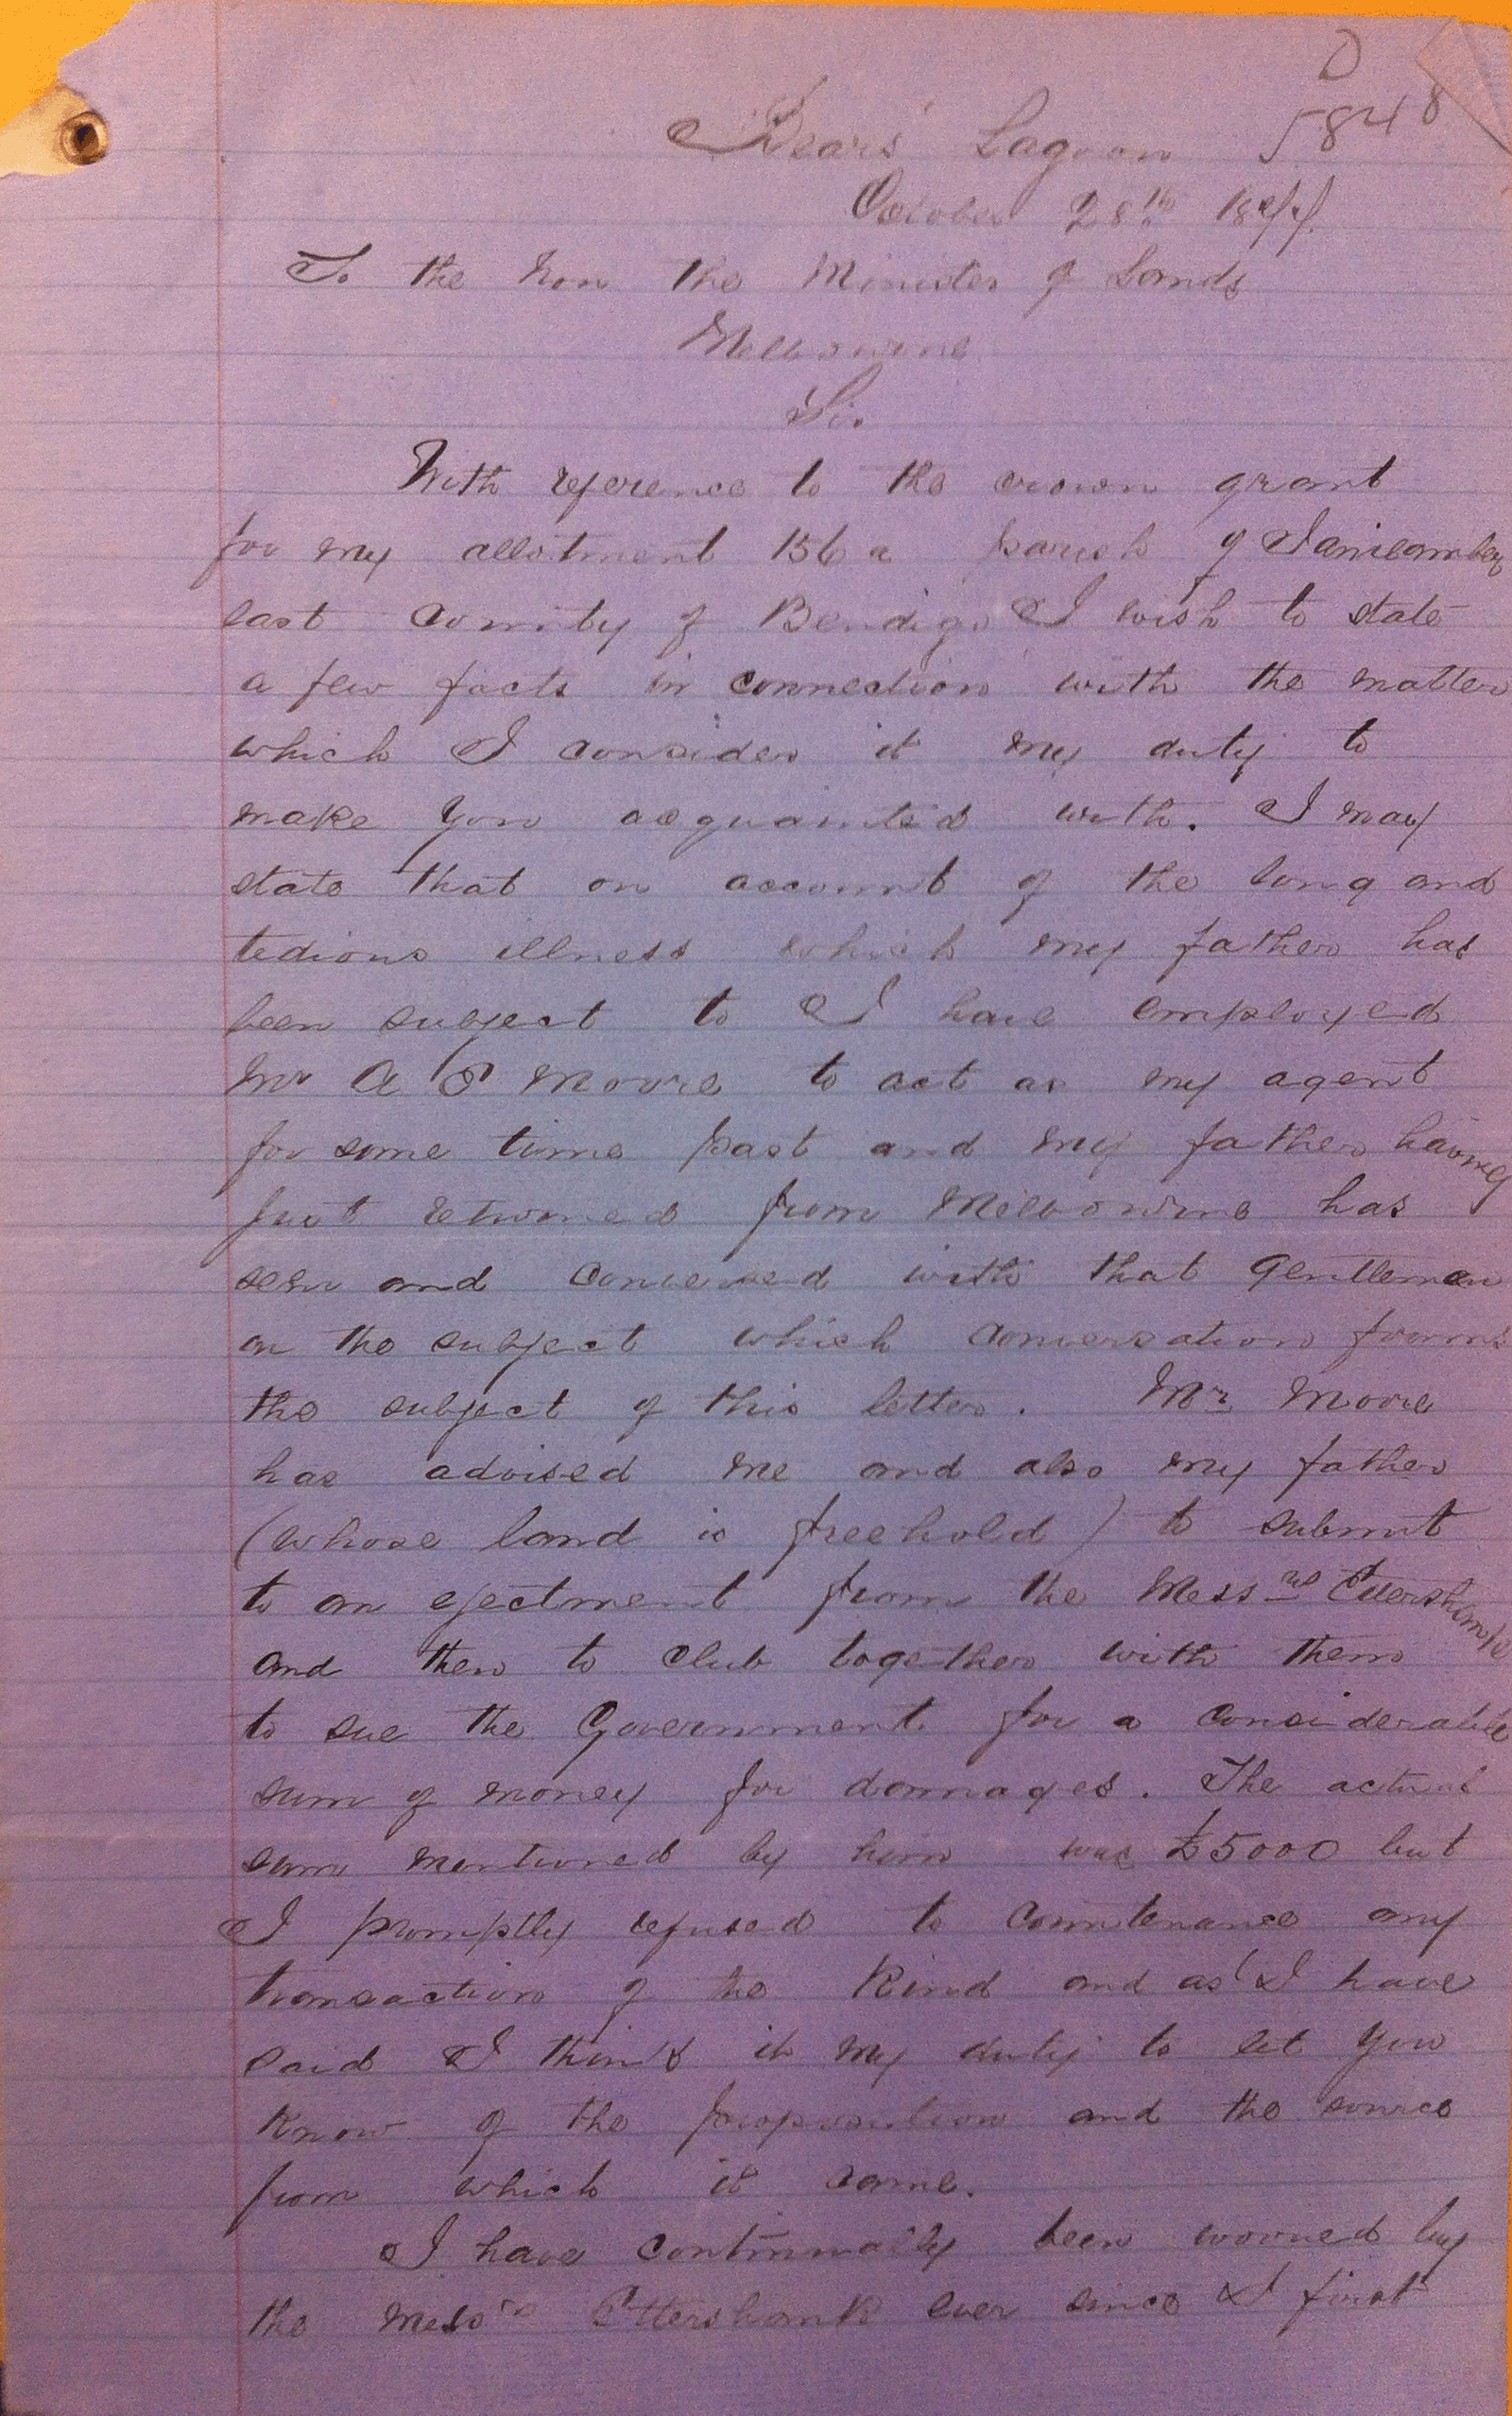 William Doody, Bears Lagoon, letter to the Minister of Lands, 28 October 1877. PROV, VPRS 625/P0, Unit 353, Item 24567.